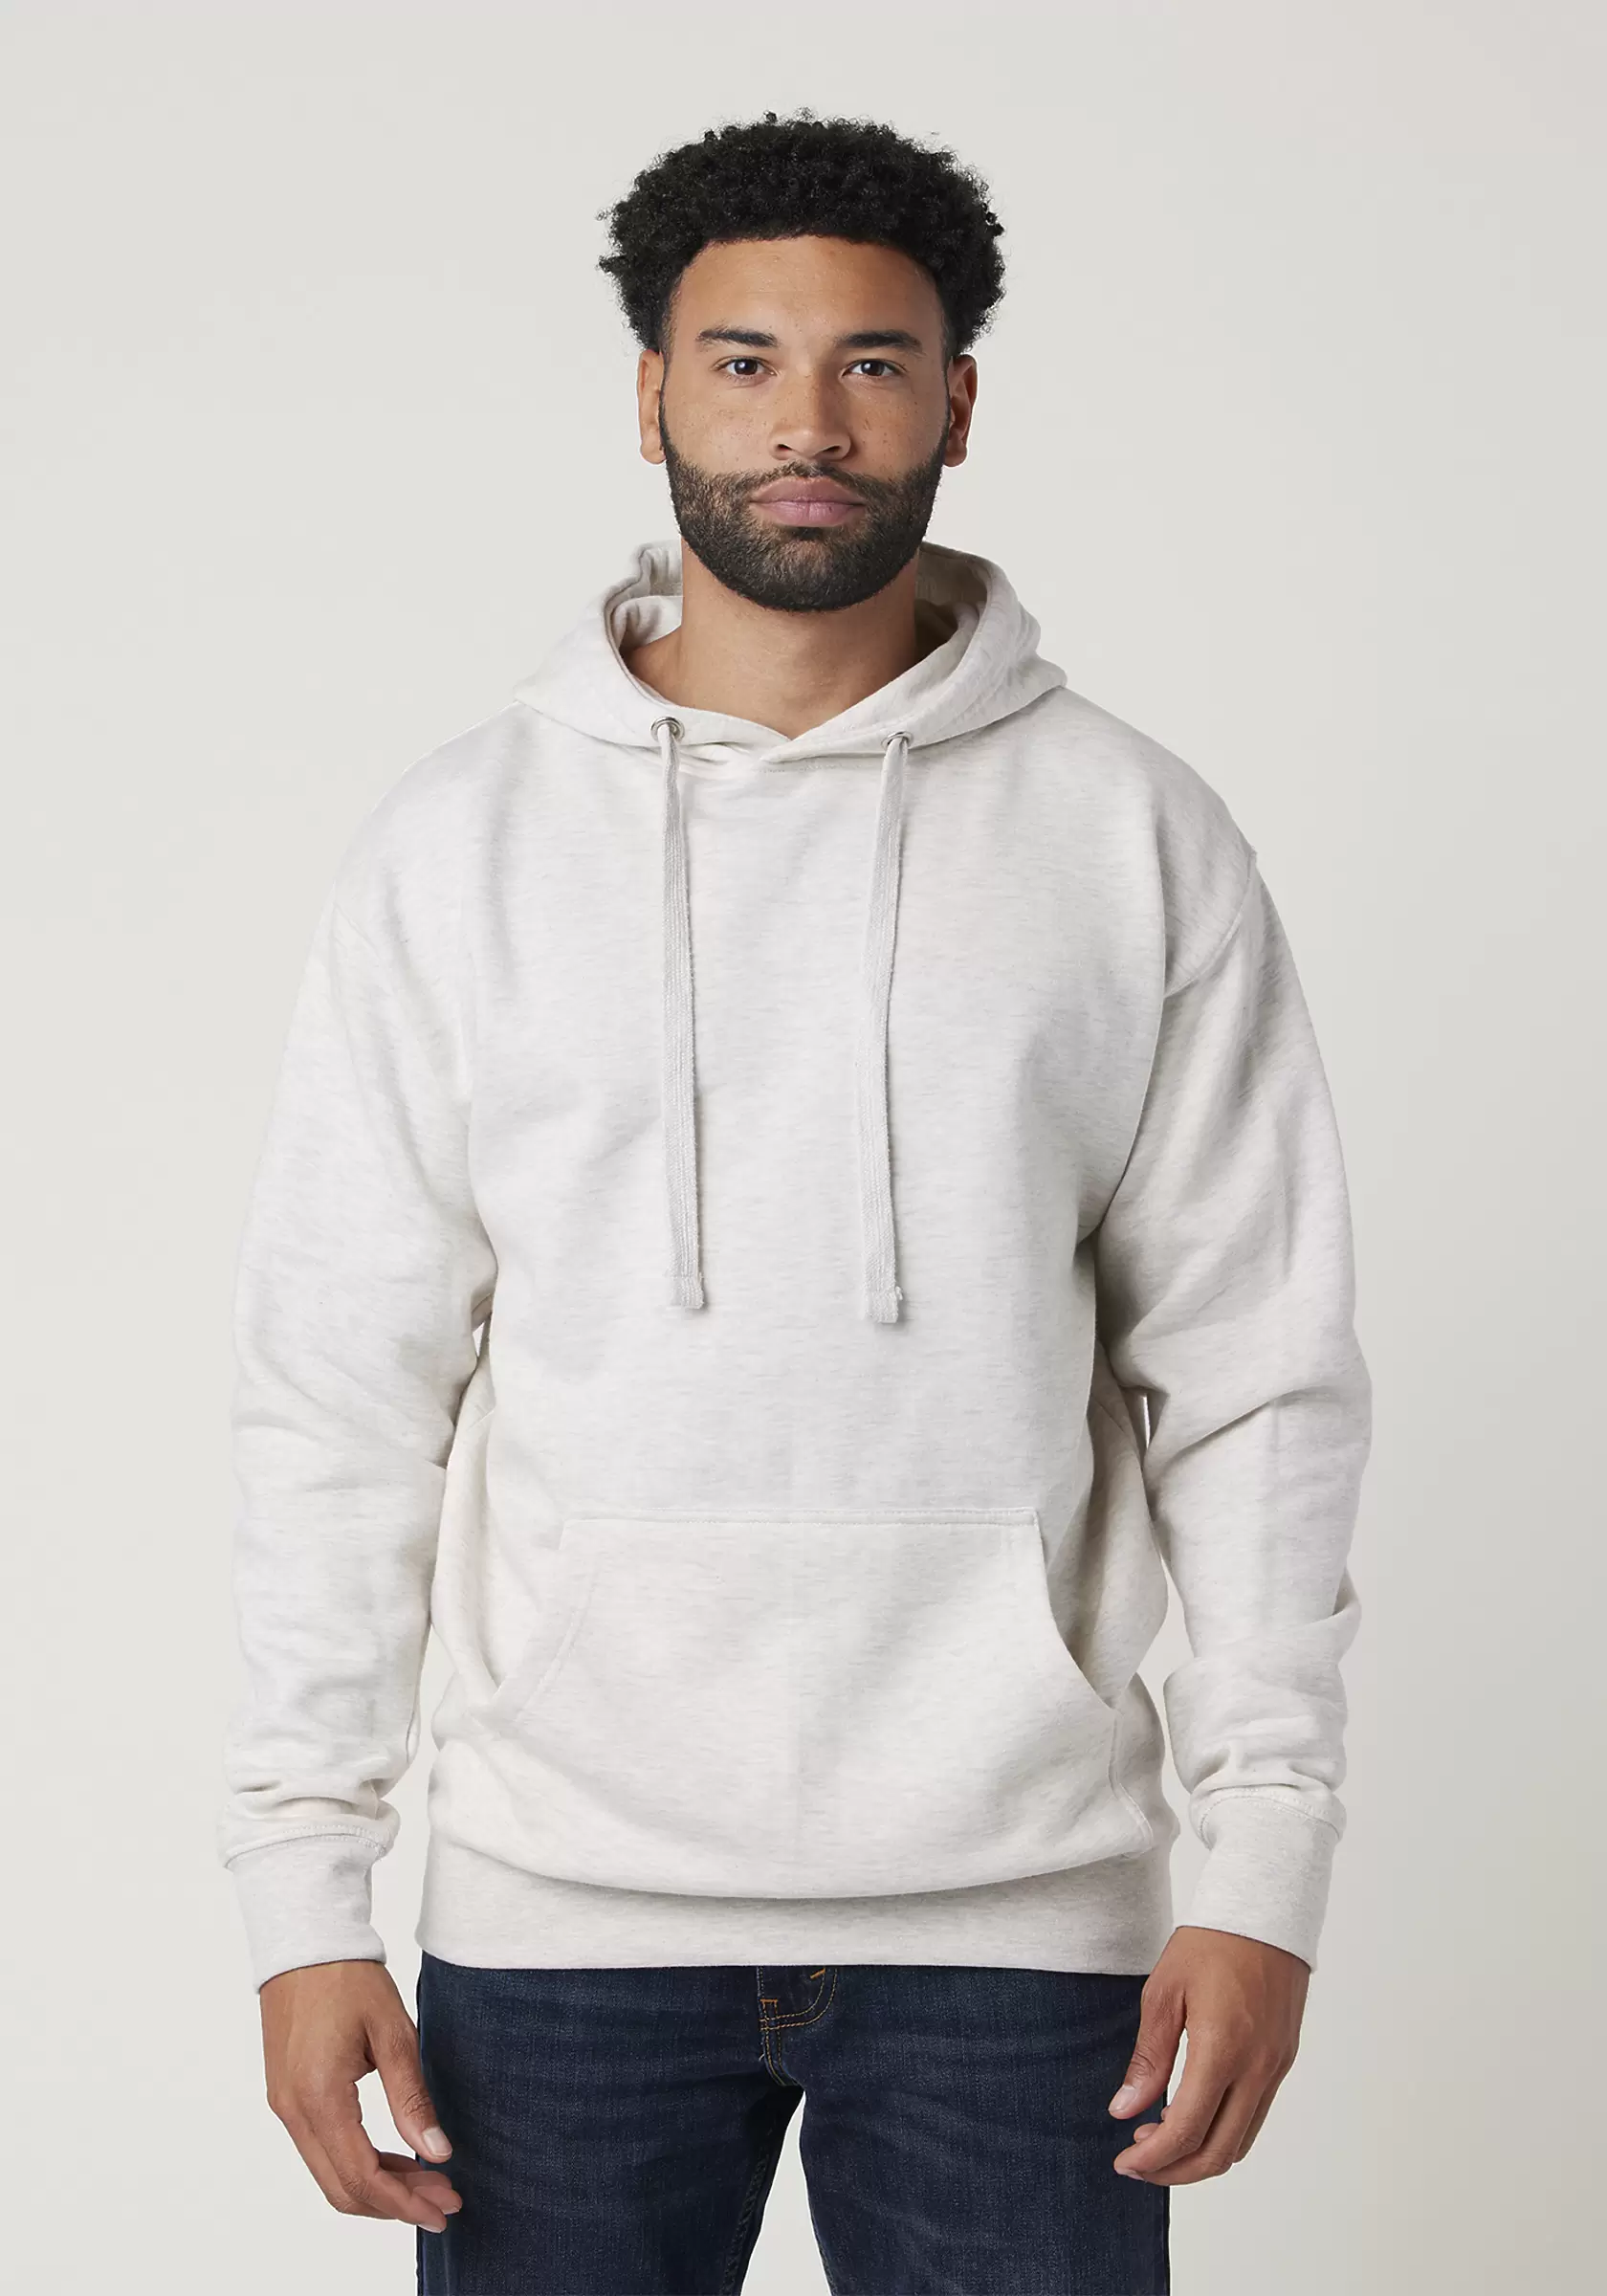 Cotton Heritage M2580 PREMIUM PULLOVER HOODIE Oatmeal Heather - From $16.07